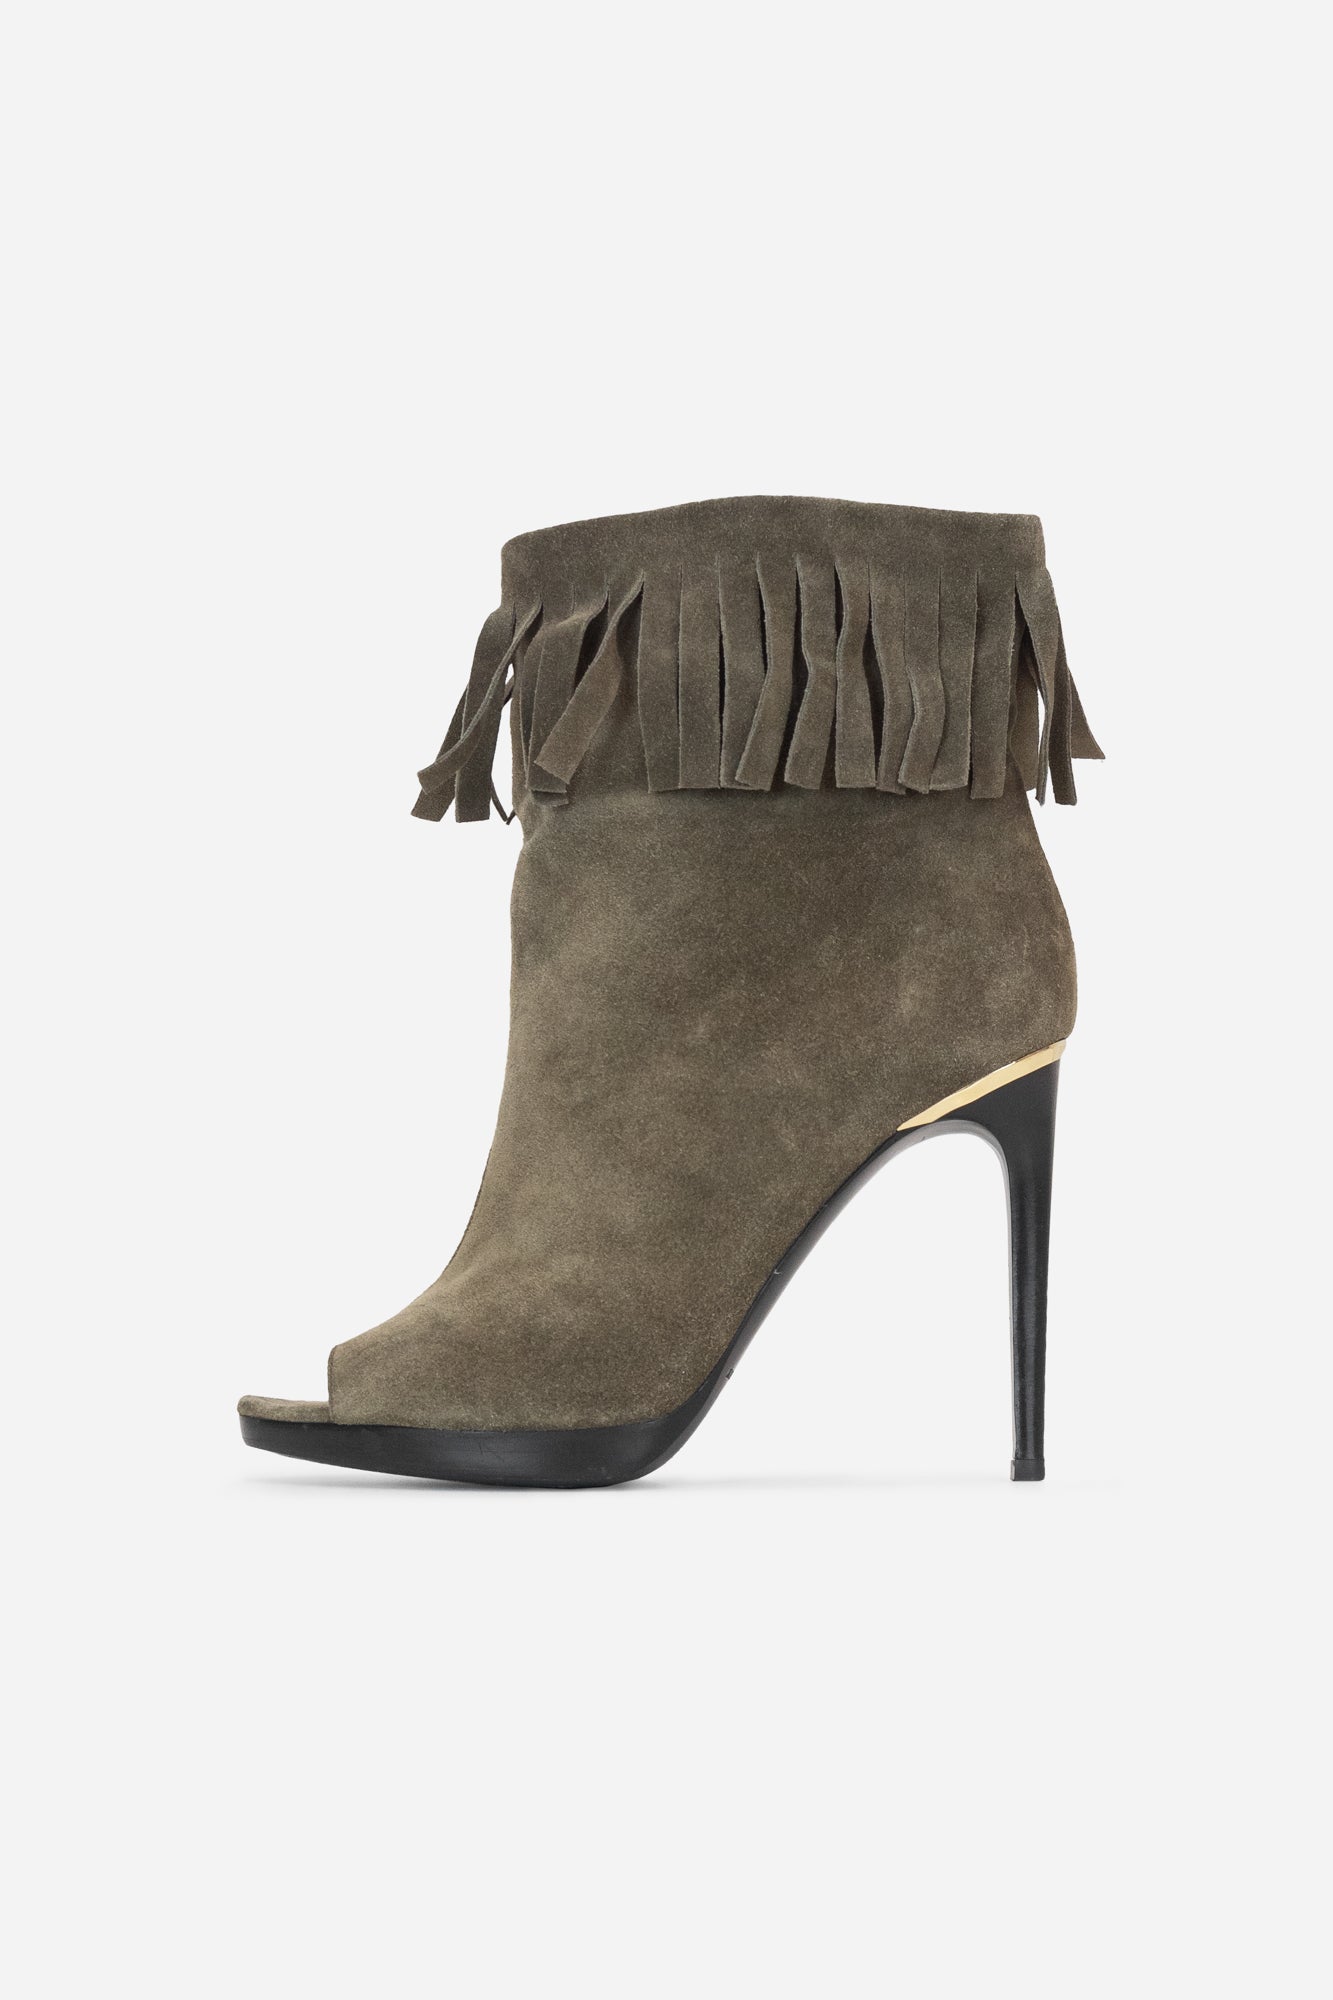 Khaki Suede Fringed Open-Toe Booties